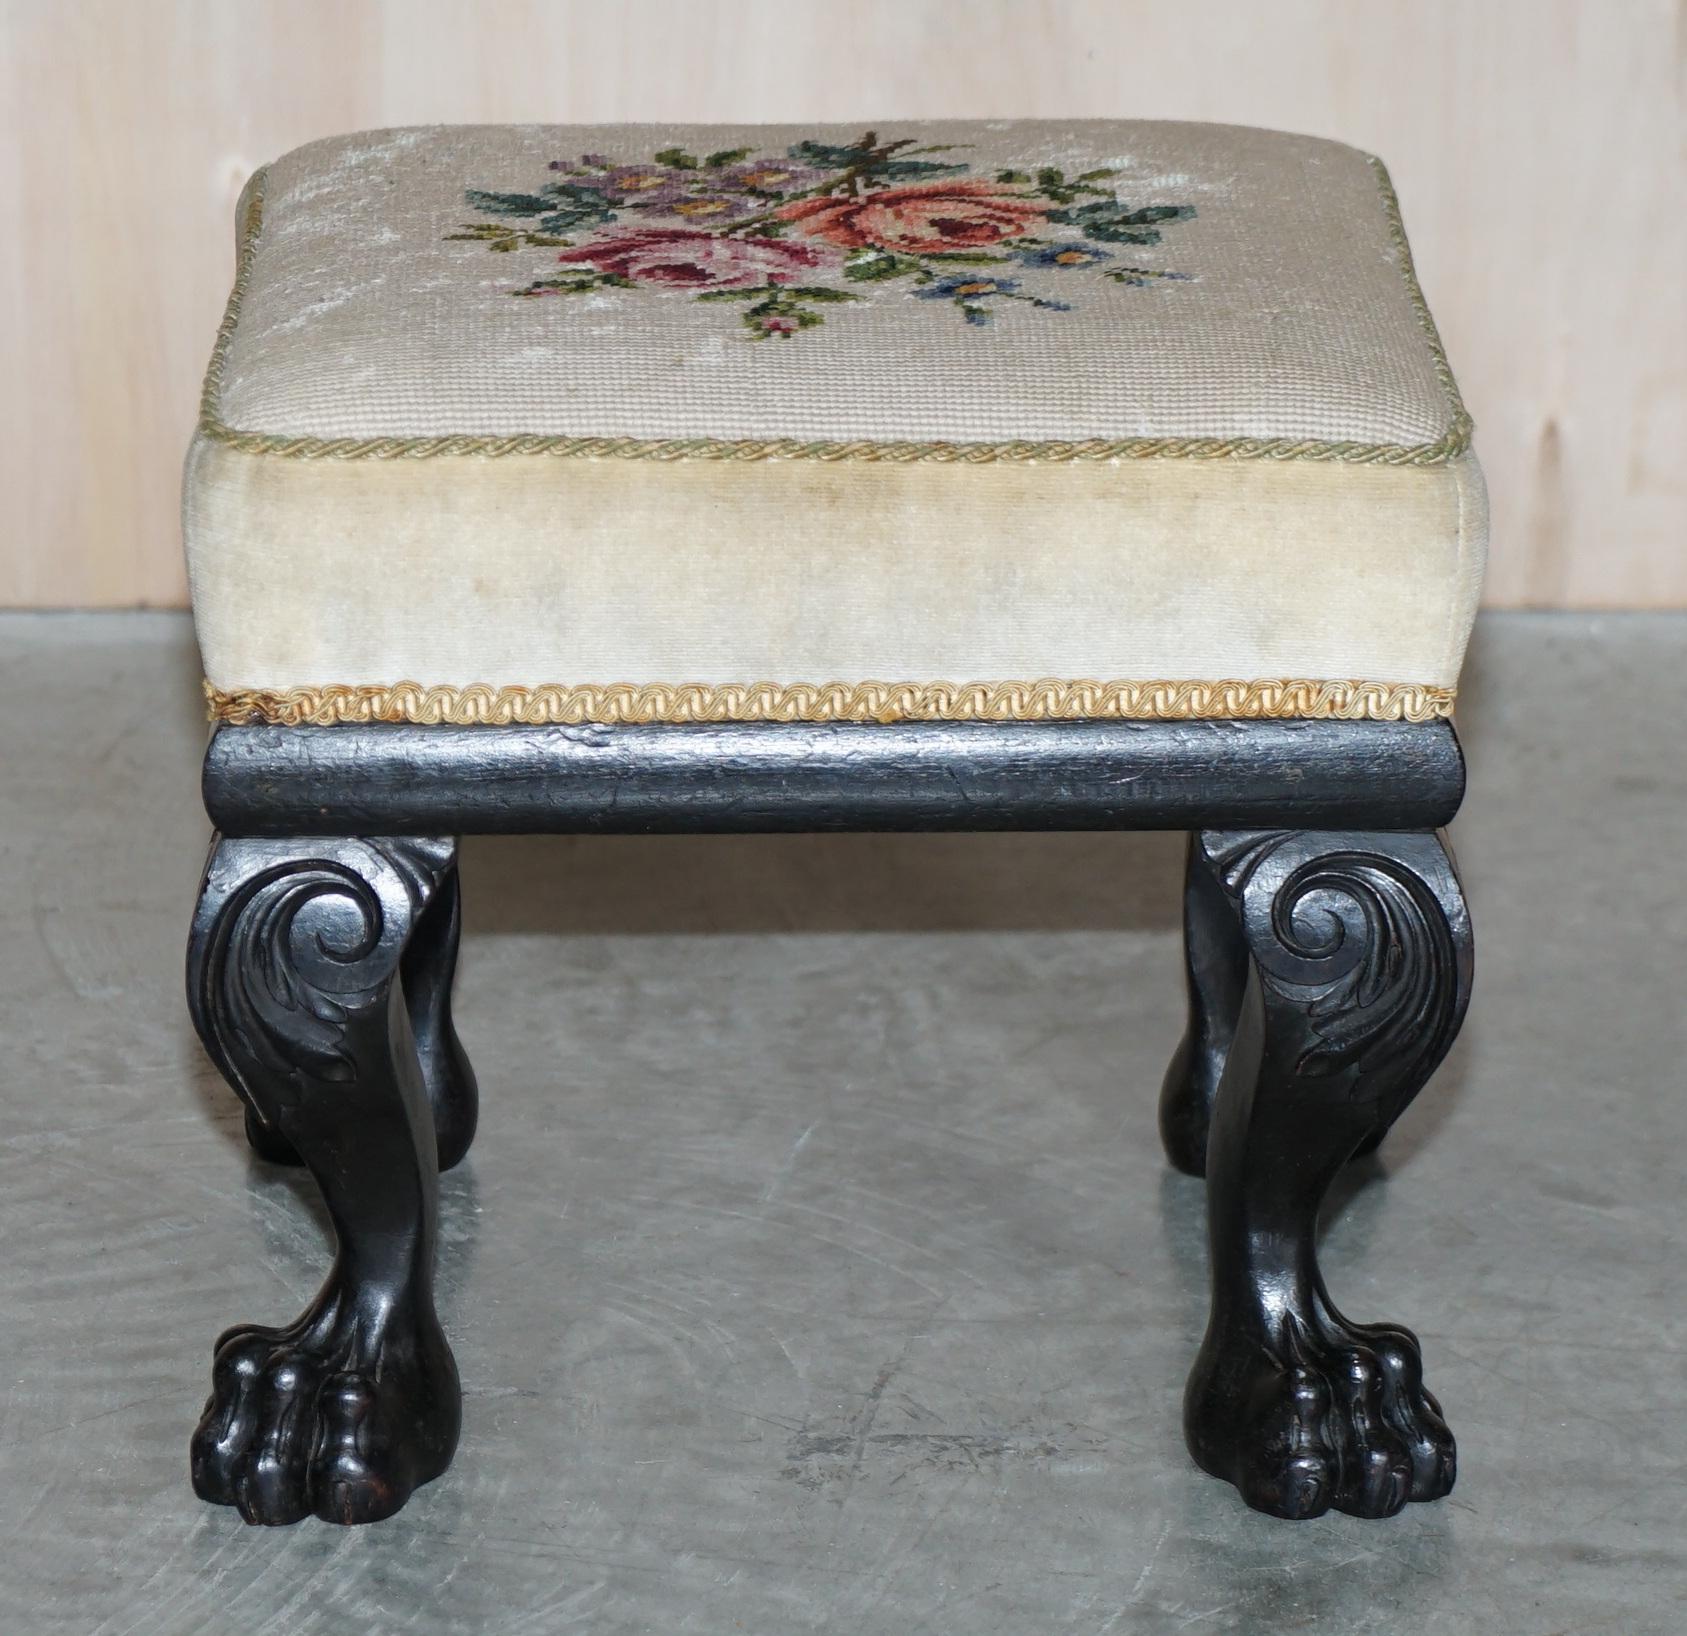 We are delighted to offer for sale this lovely hand made in England, circa 1880-1900 Ebonised footstool with elaborate hand carved Lion’s hairy paw feet.

A very good looking well made and decorative stool, the feet are a real tour de force of